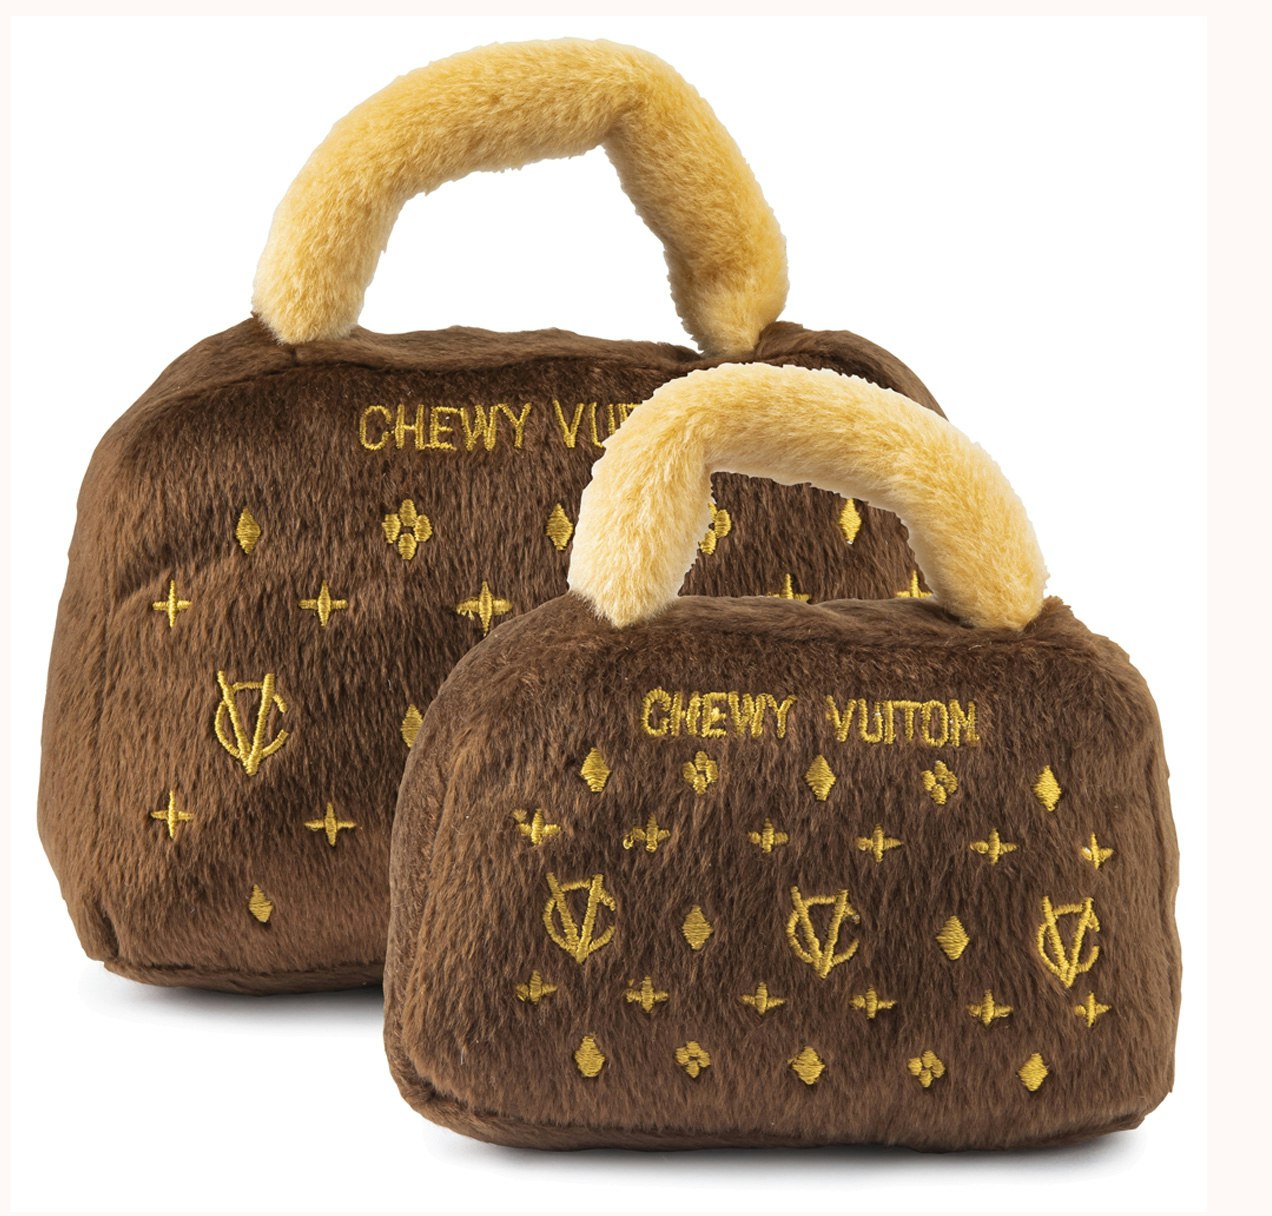 Chewy Bag, Brown